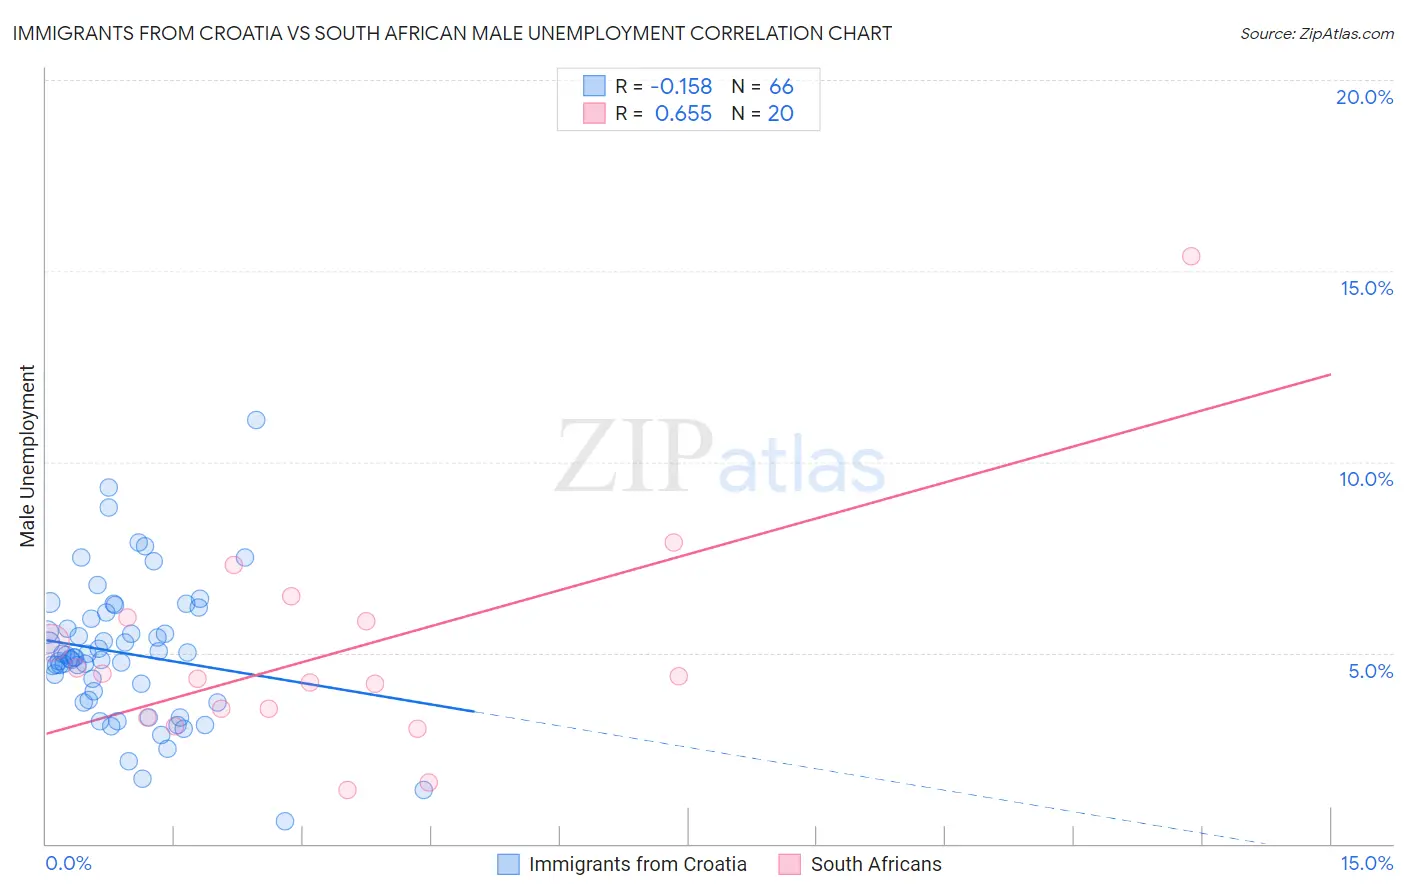 Immigrants from Croatia vs South African Male Unemployment